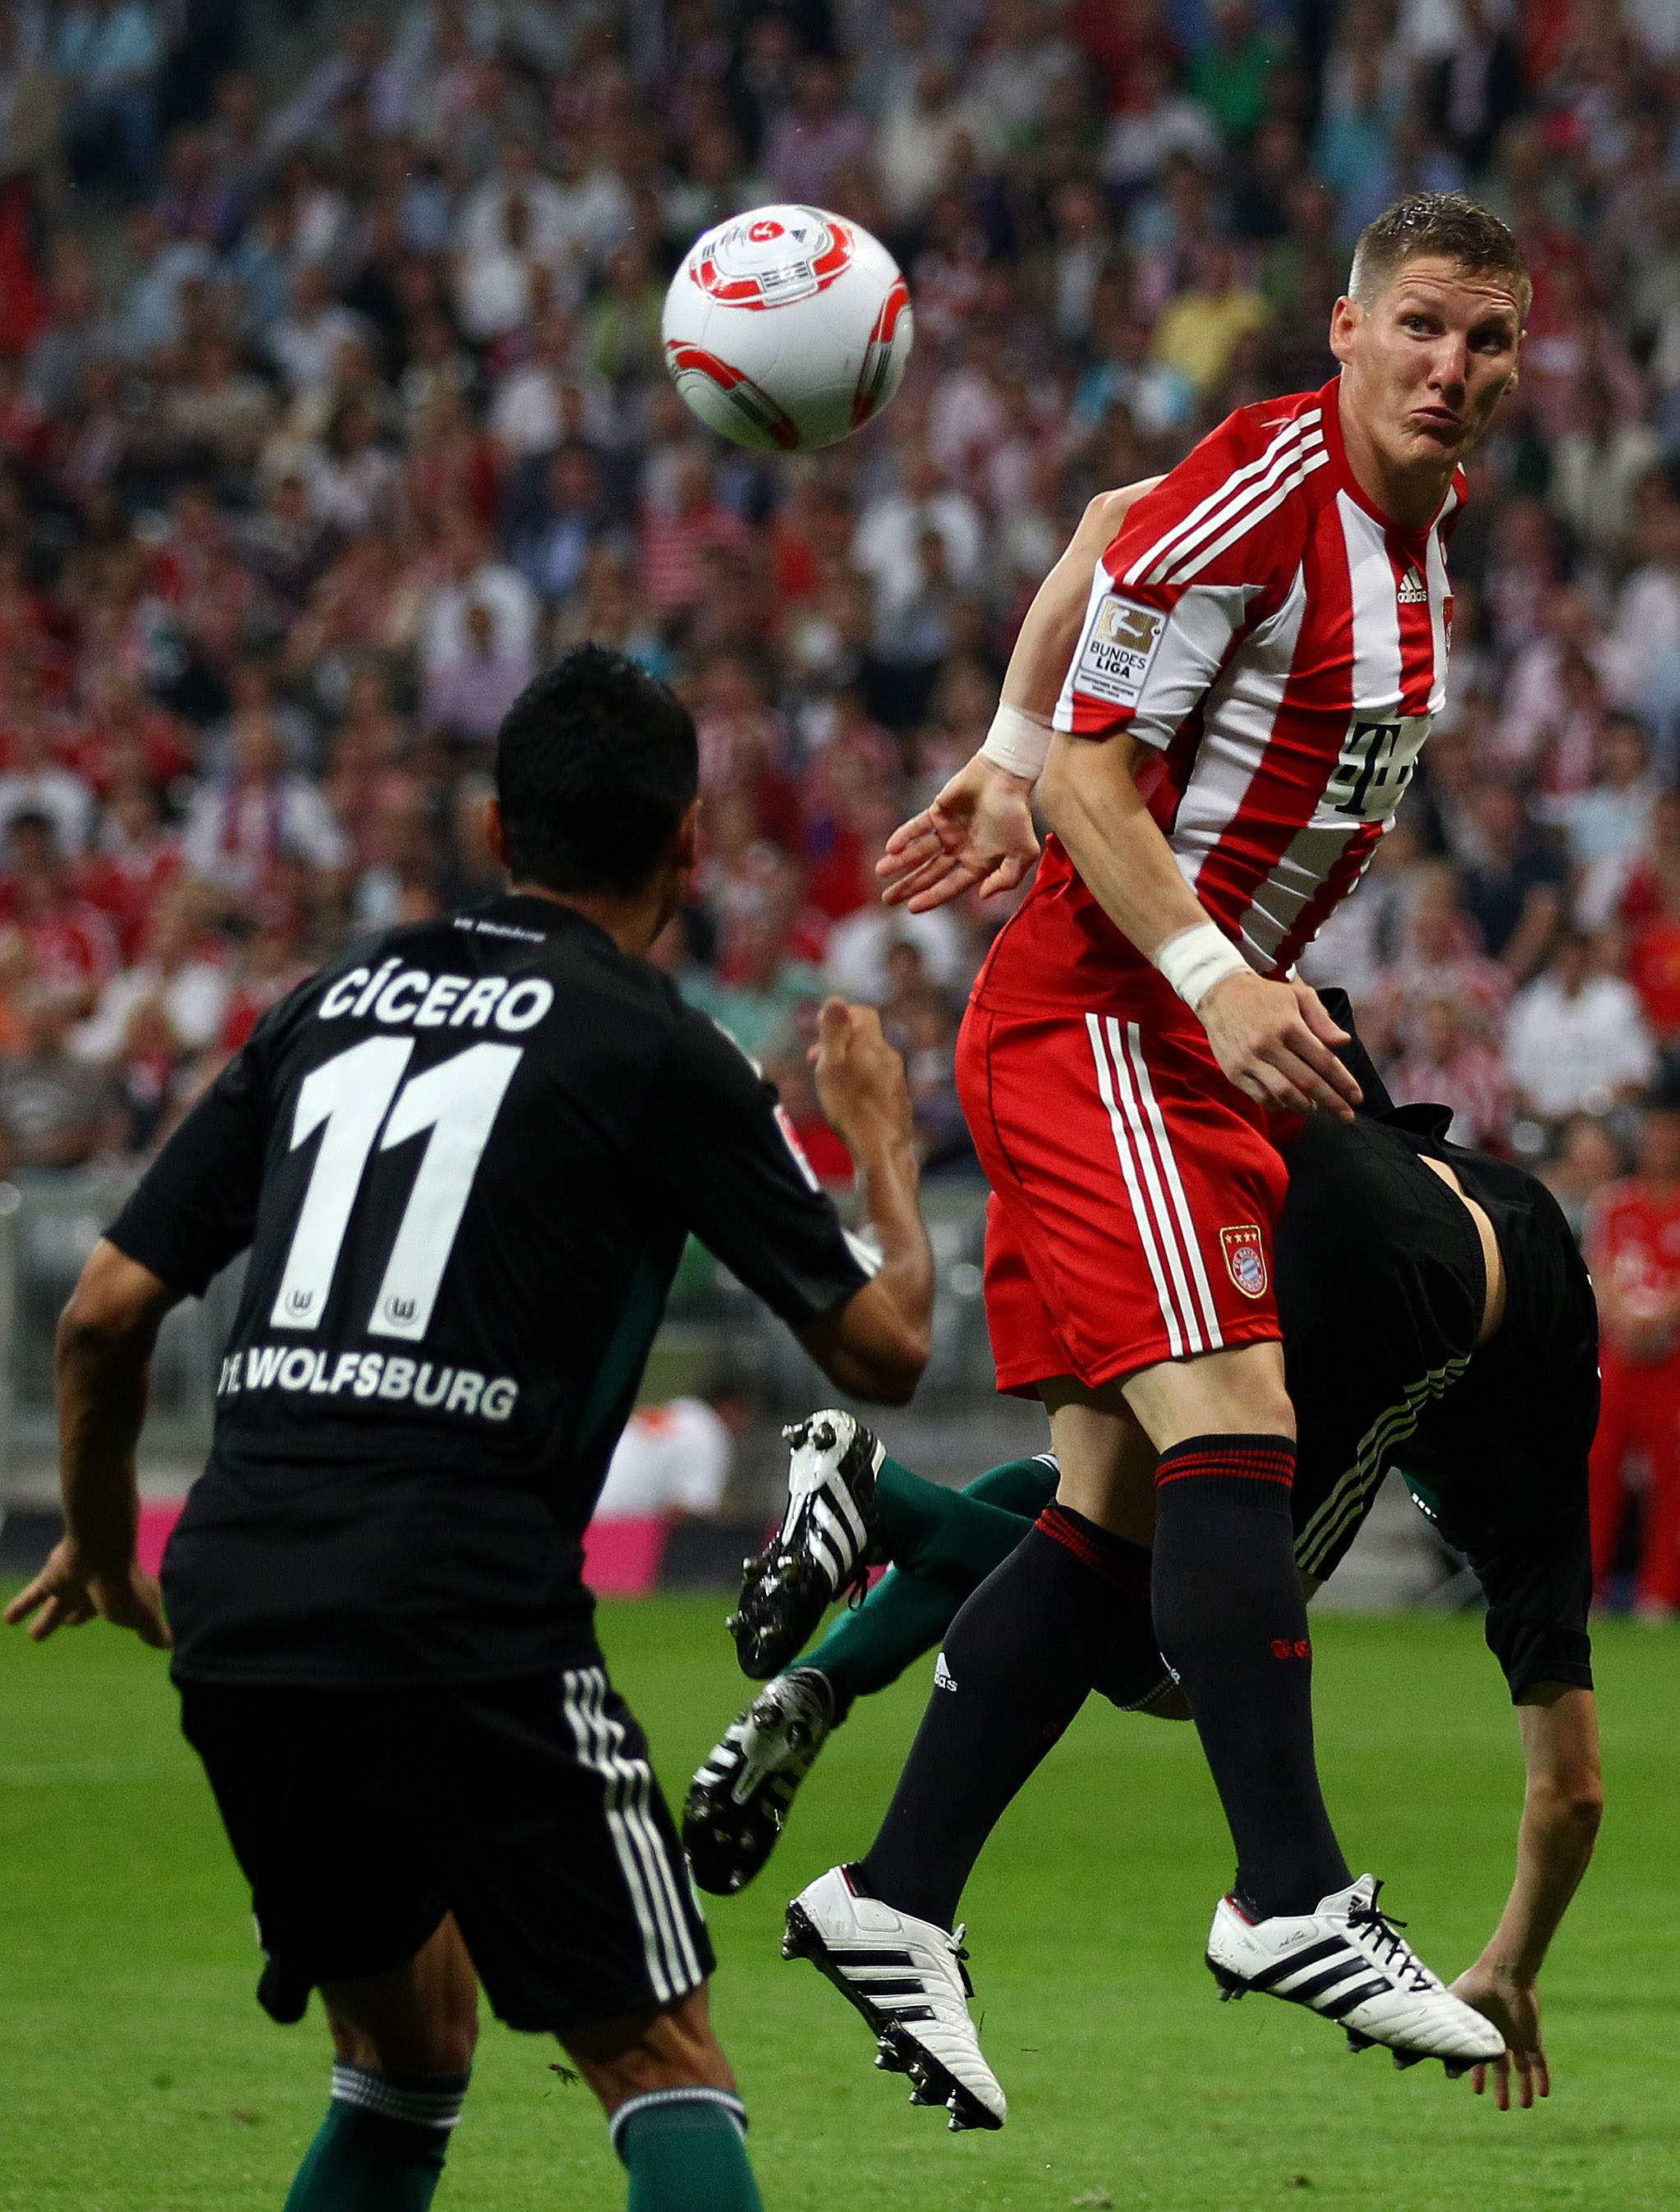 MUNICH, GERMANY - AUGUST 20: Bastian Schweinsteiger of Bayern jumps for a header during the Bundesliga match between FC Bayern Muenchen and VfL Wolfsburg at Allianz Arena on August 20, 2010 in Munich, Germany.  (Photo by Clive Brunskill/Getty Images)